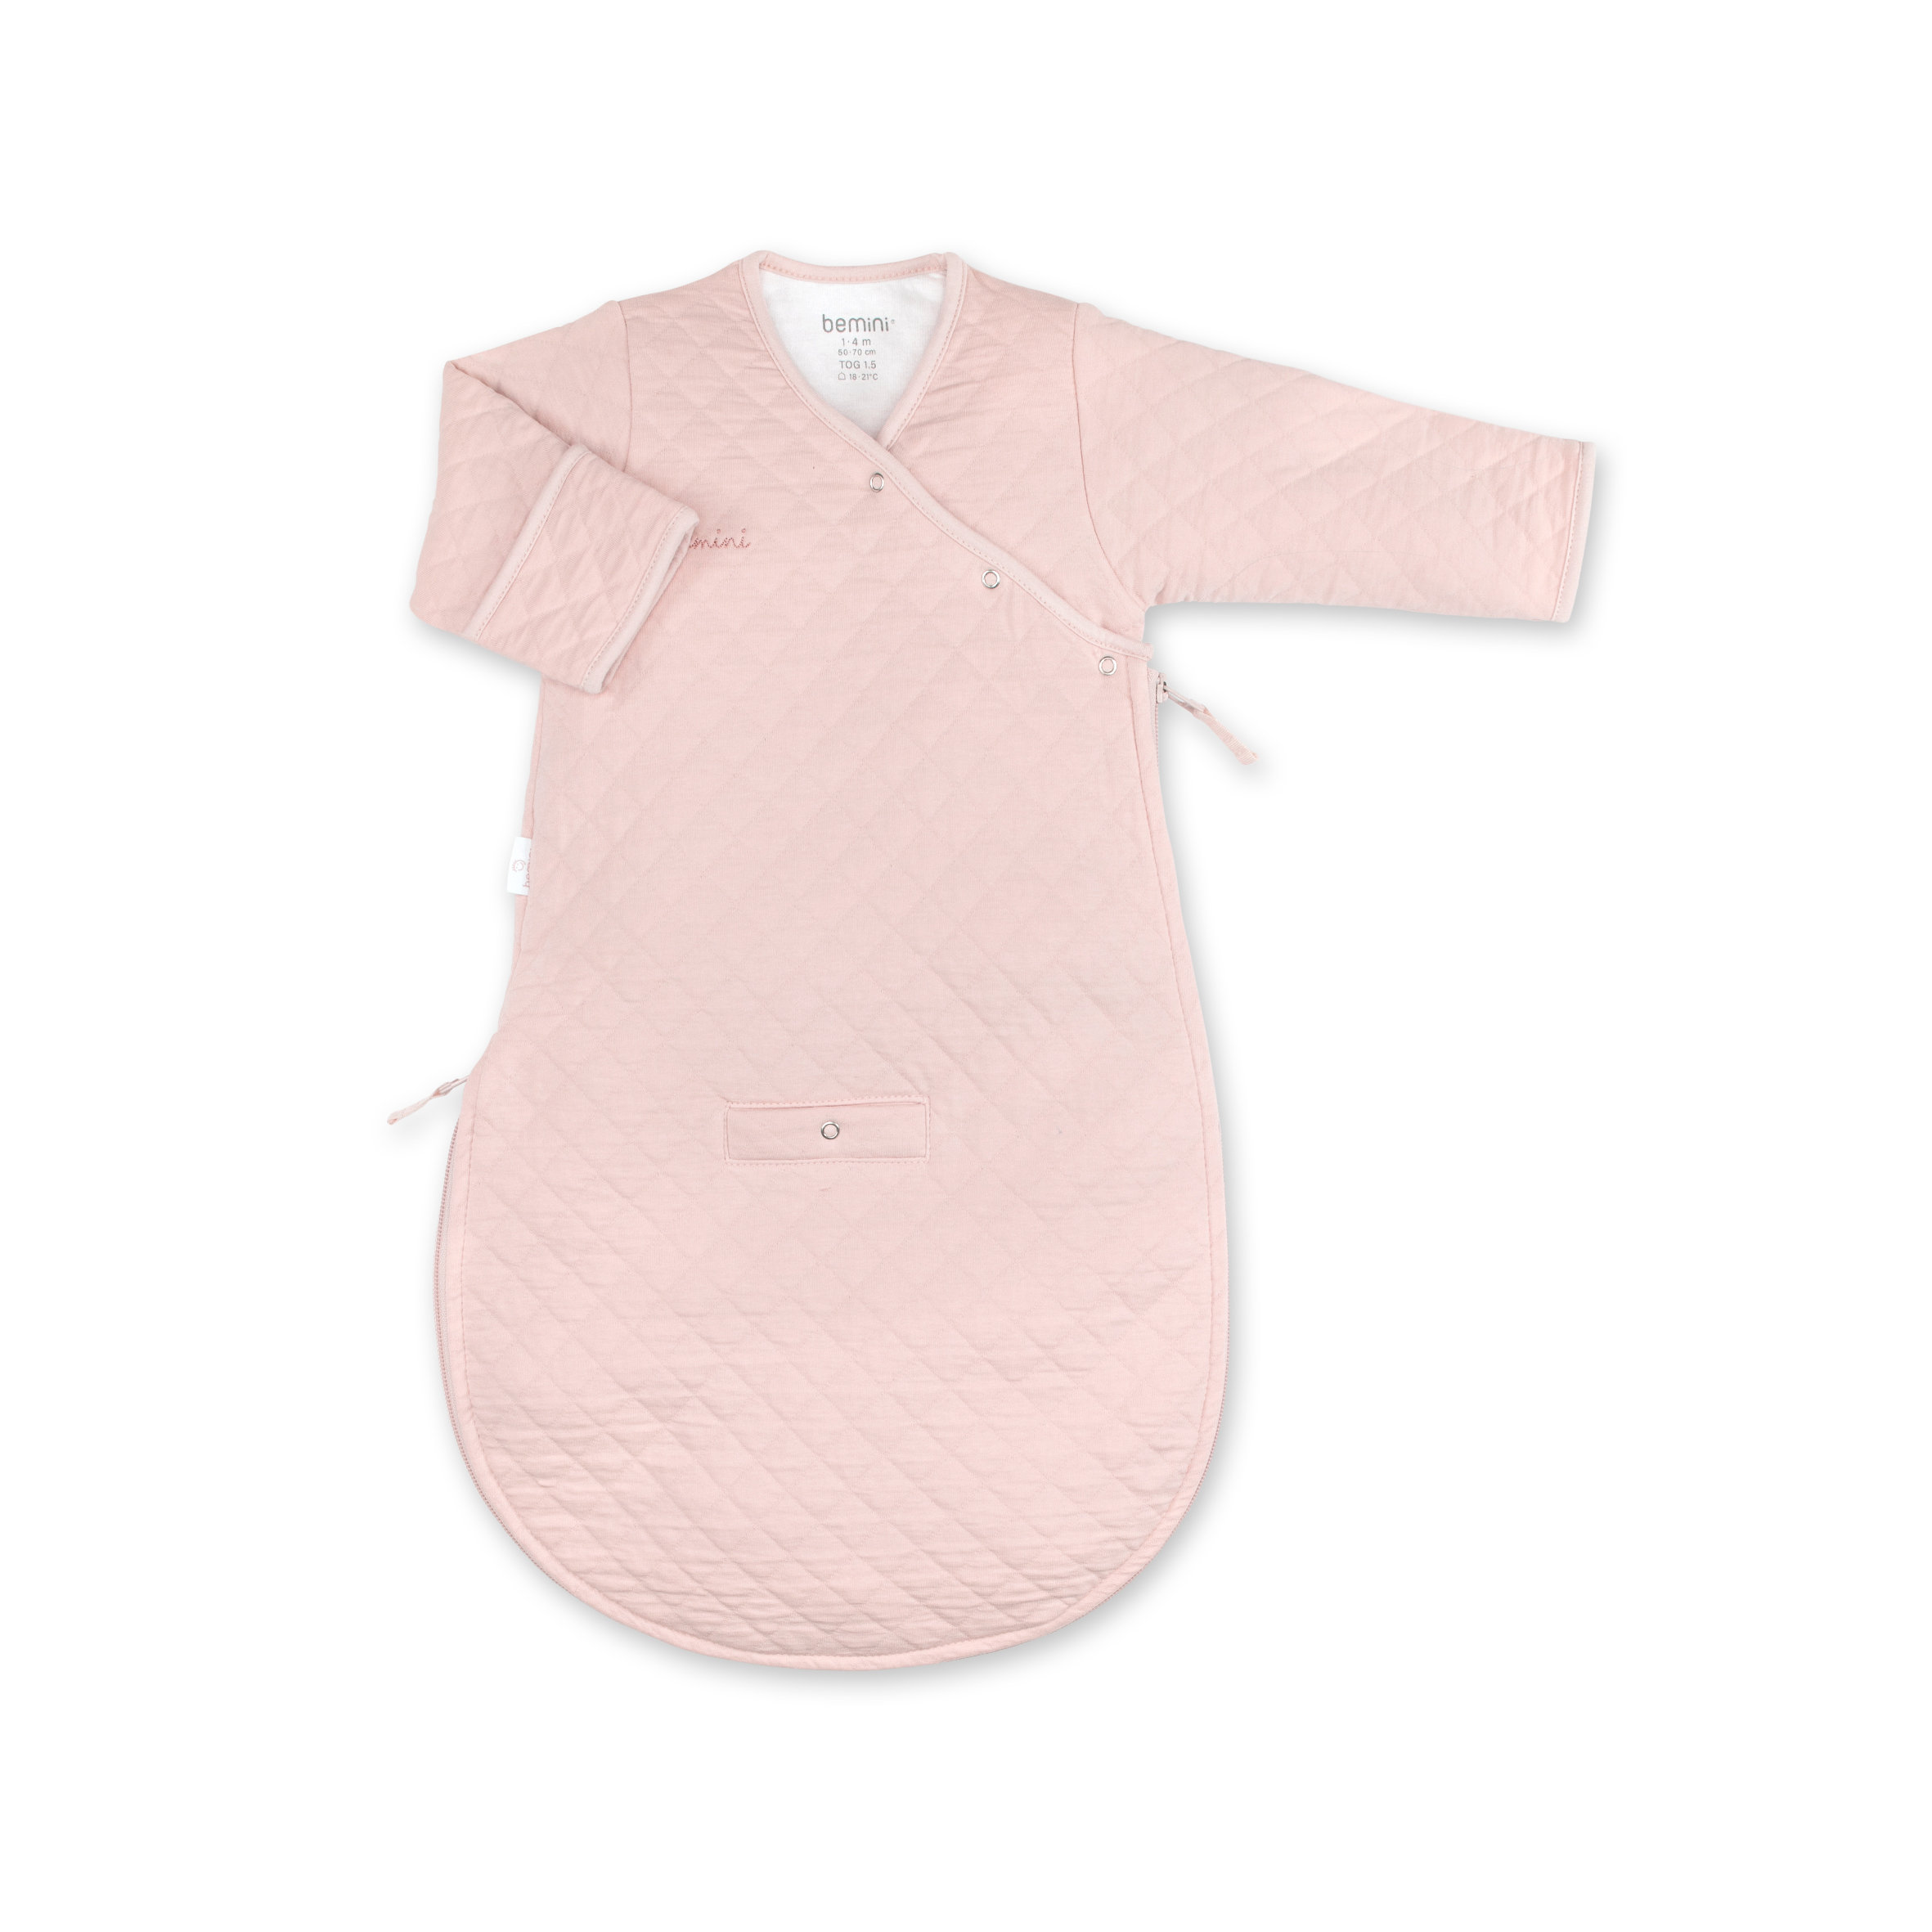 MAGIC BAG Pady quilted jersey 1-4m QUILT Blush tog 1.5